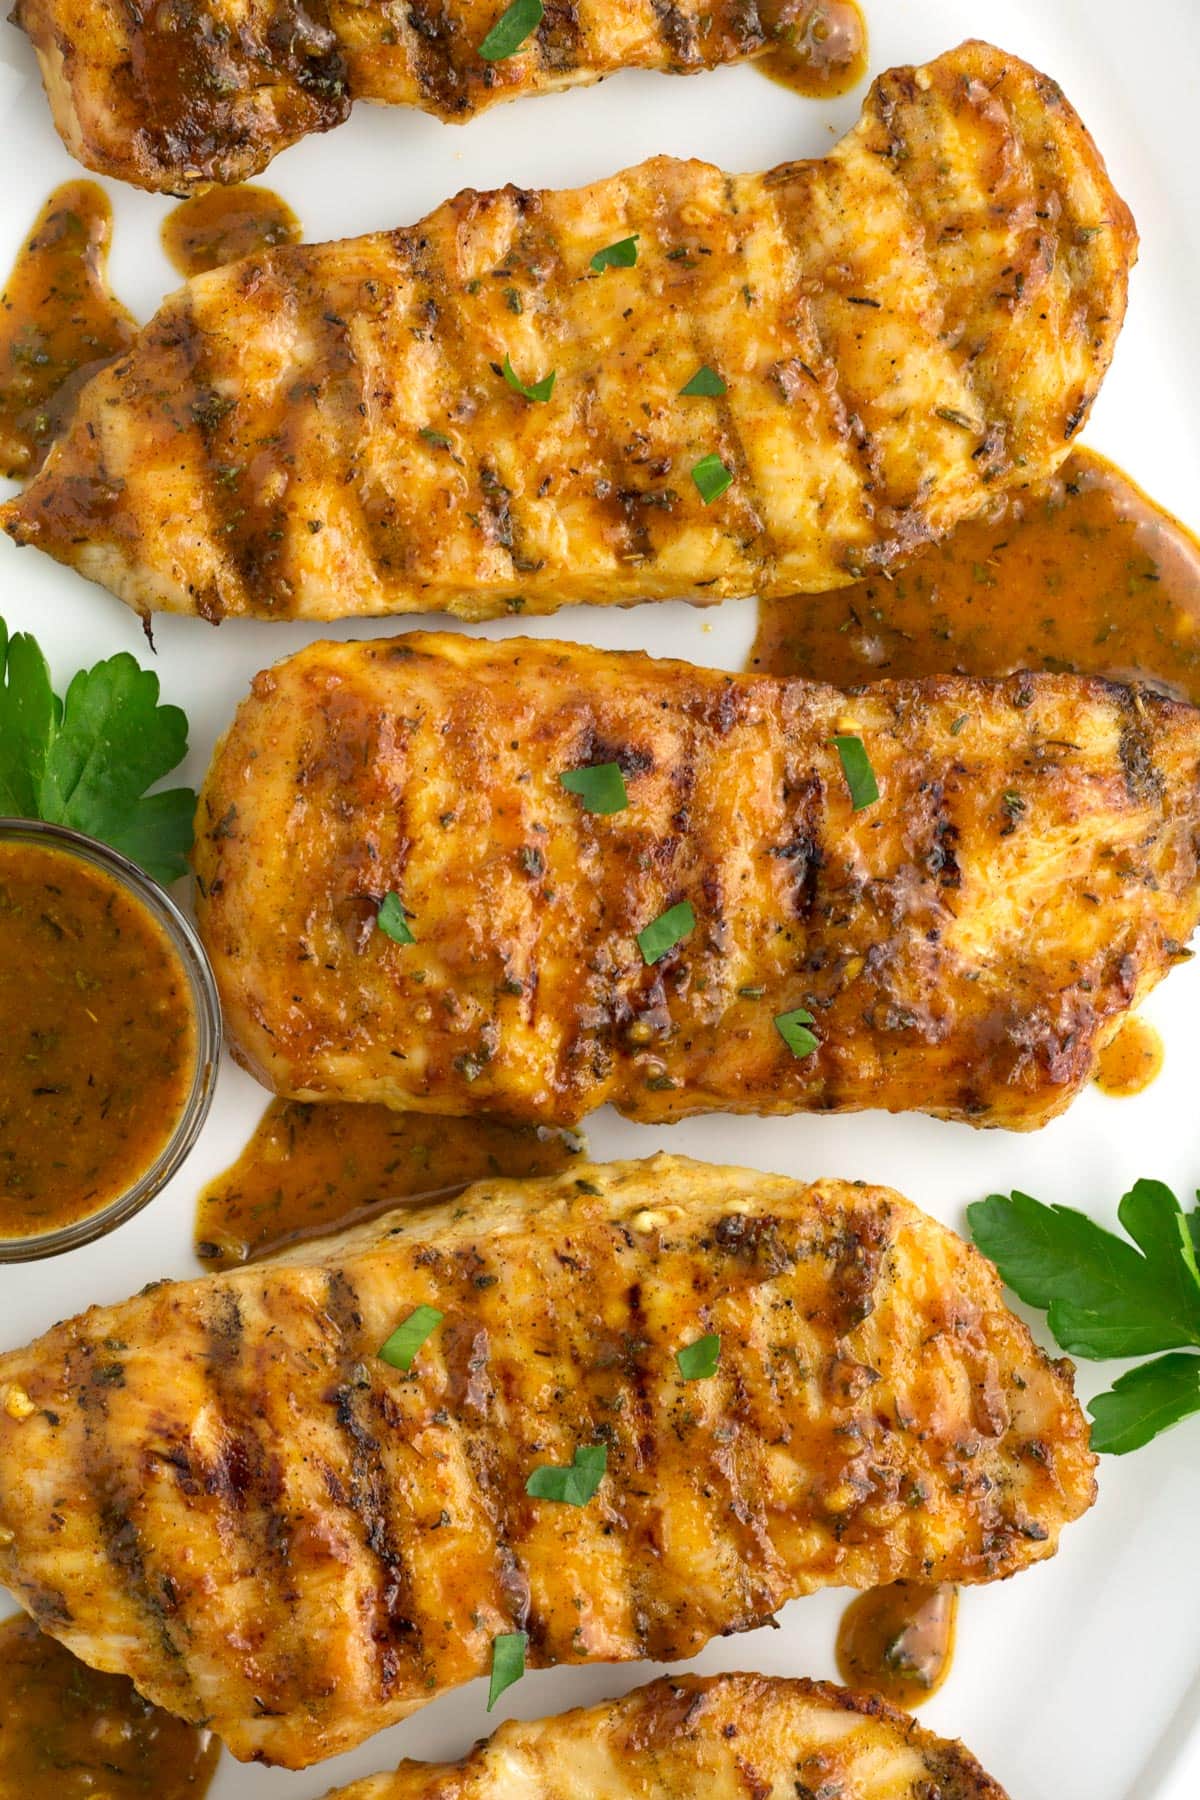 Weekly meal plan ideas: Grilled mustard chicken at Borrowed Bites